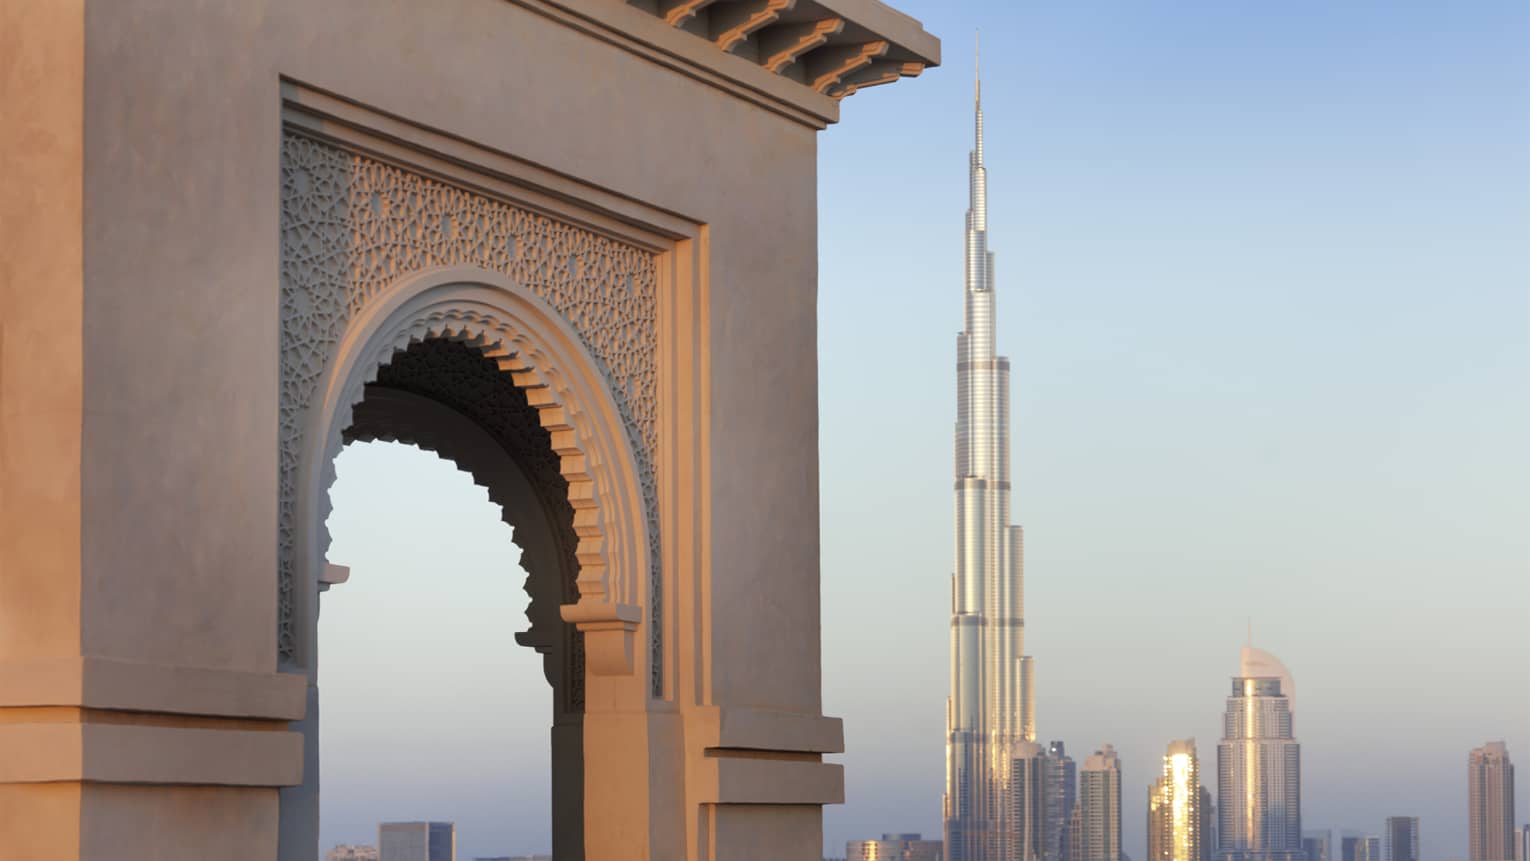 Orange glow of sunset on a decorative stone arch, the iconic Burj Khalifa gleaming in the distance against blue sky.,Orange glow of sunset on a decorative stone arch, the iconic Burj Khalifa gleaming in the distance against blue sky.